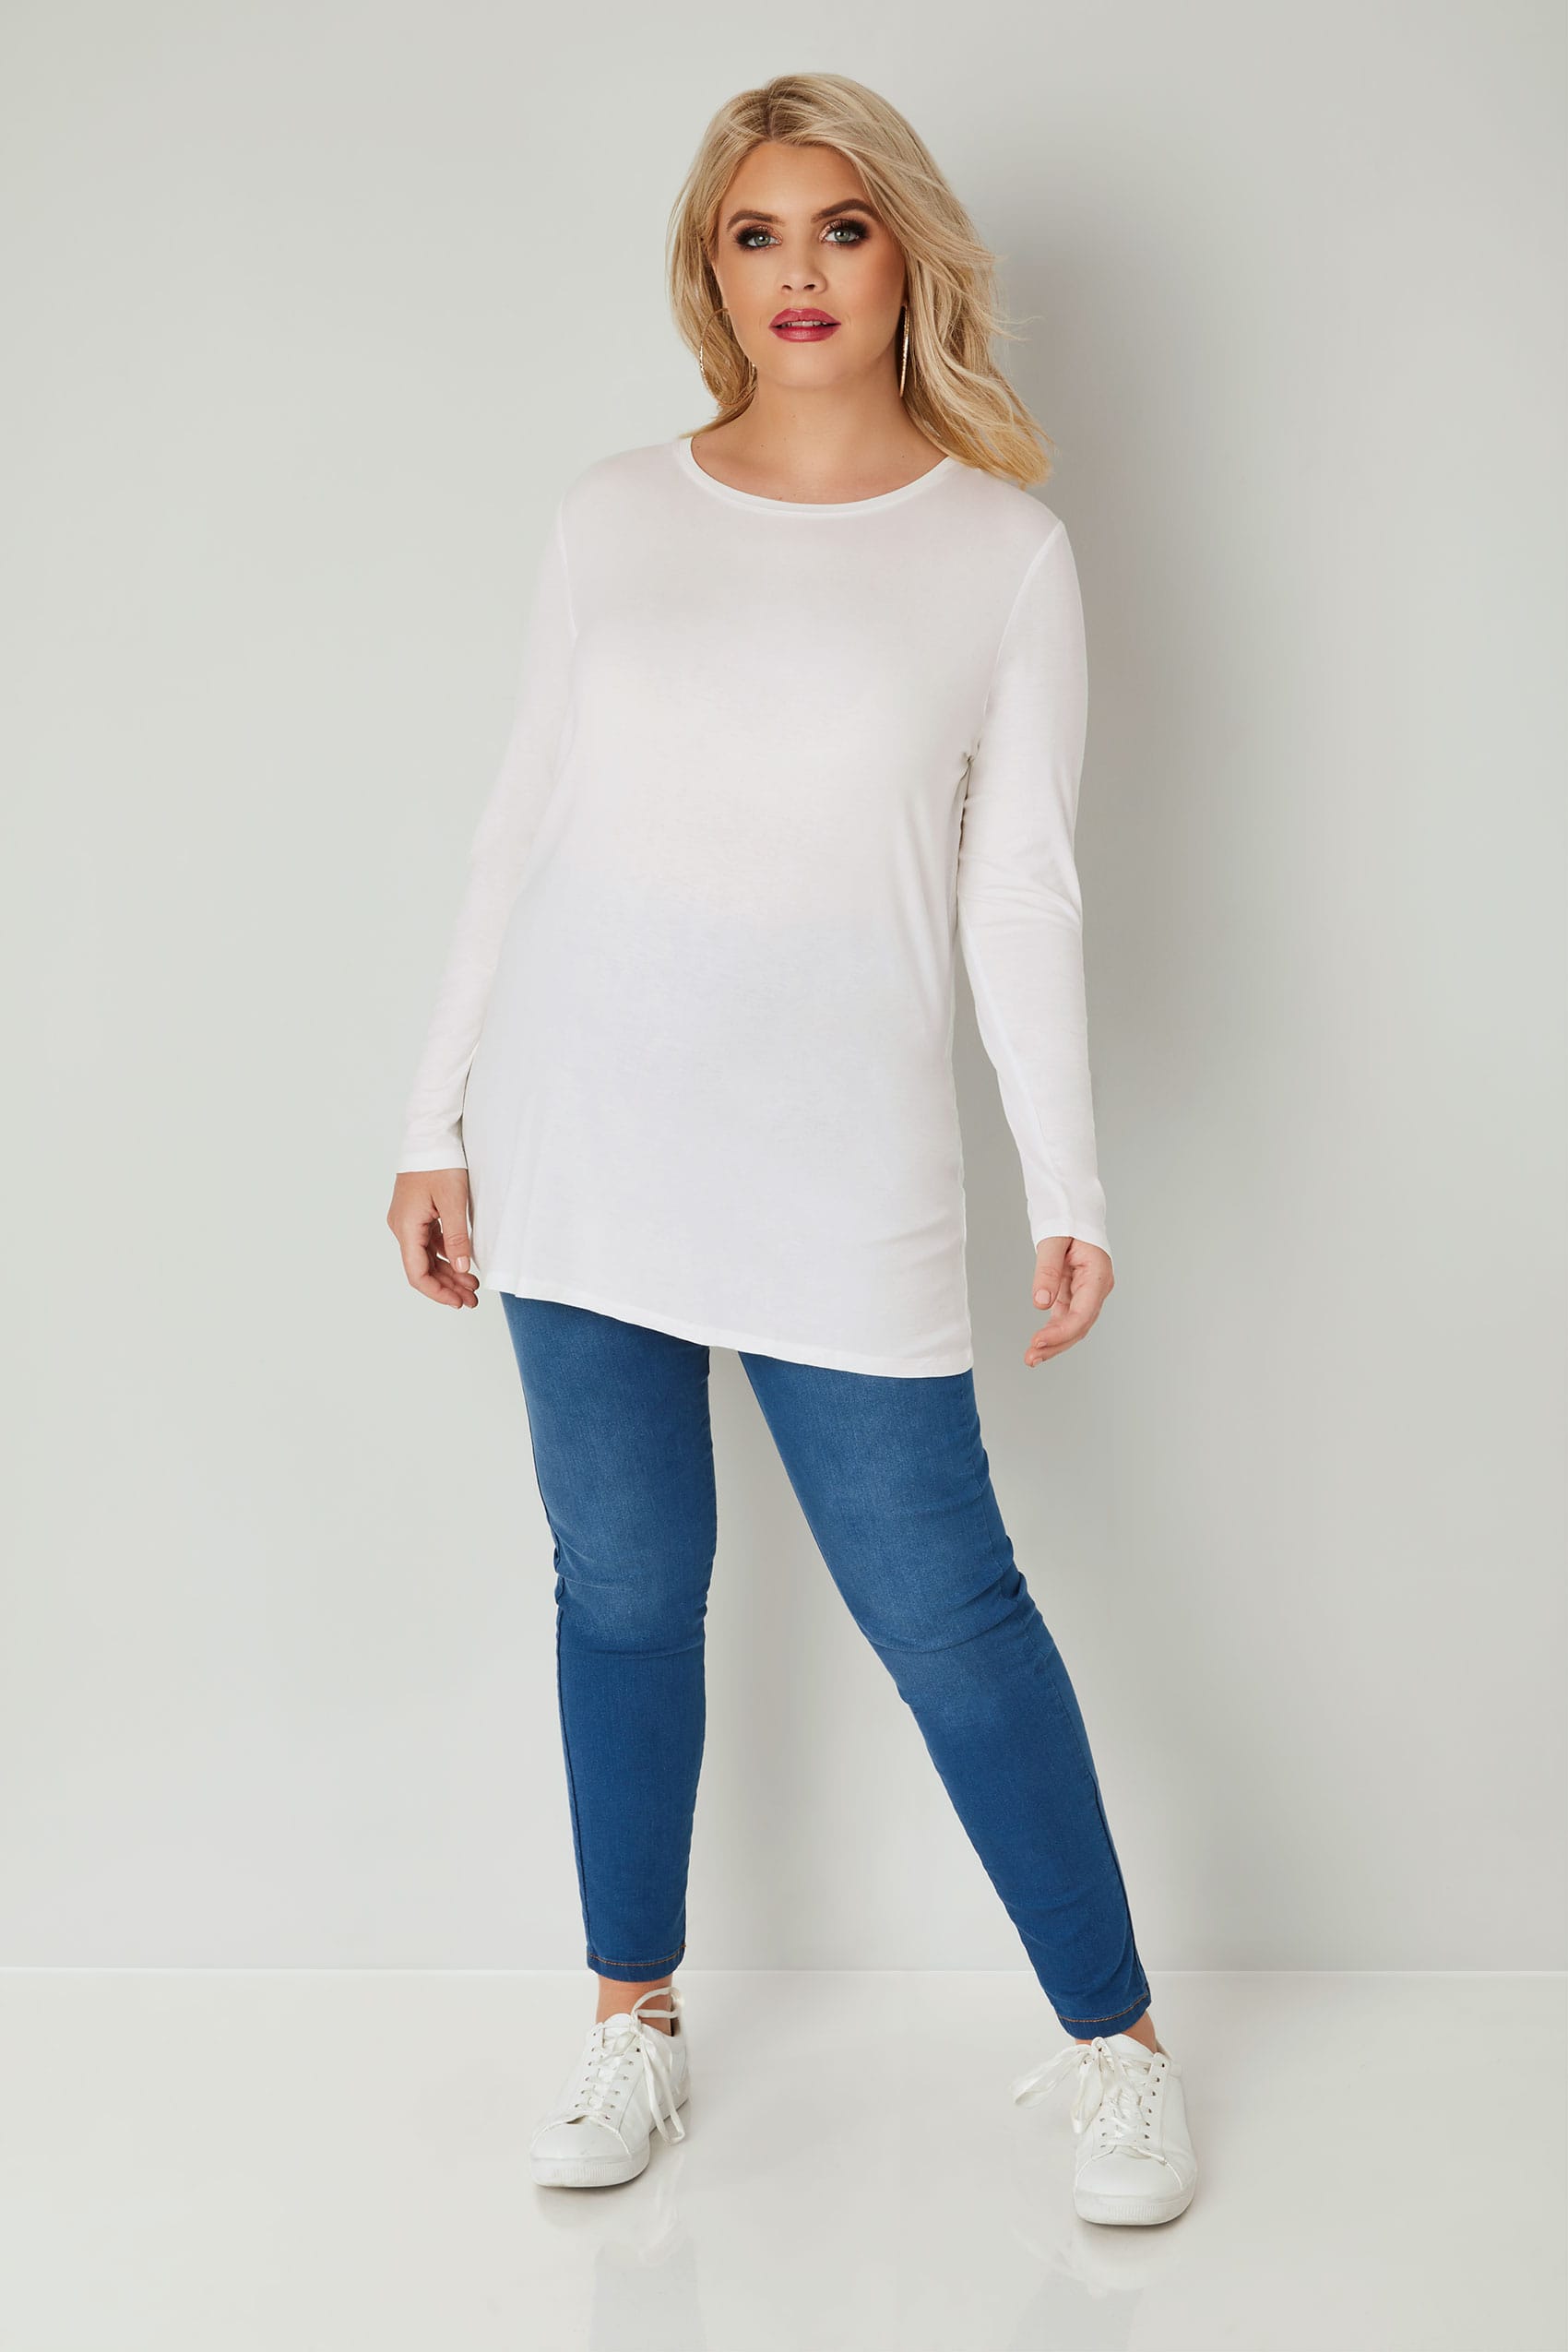 White Long Sleeve Soft Touch Jersey Top, Plus size 16 to 36